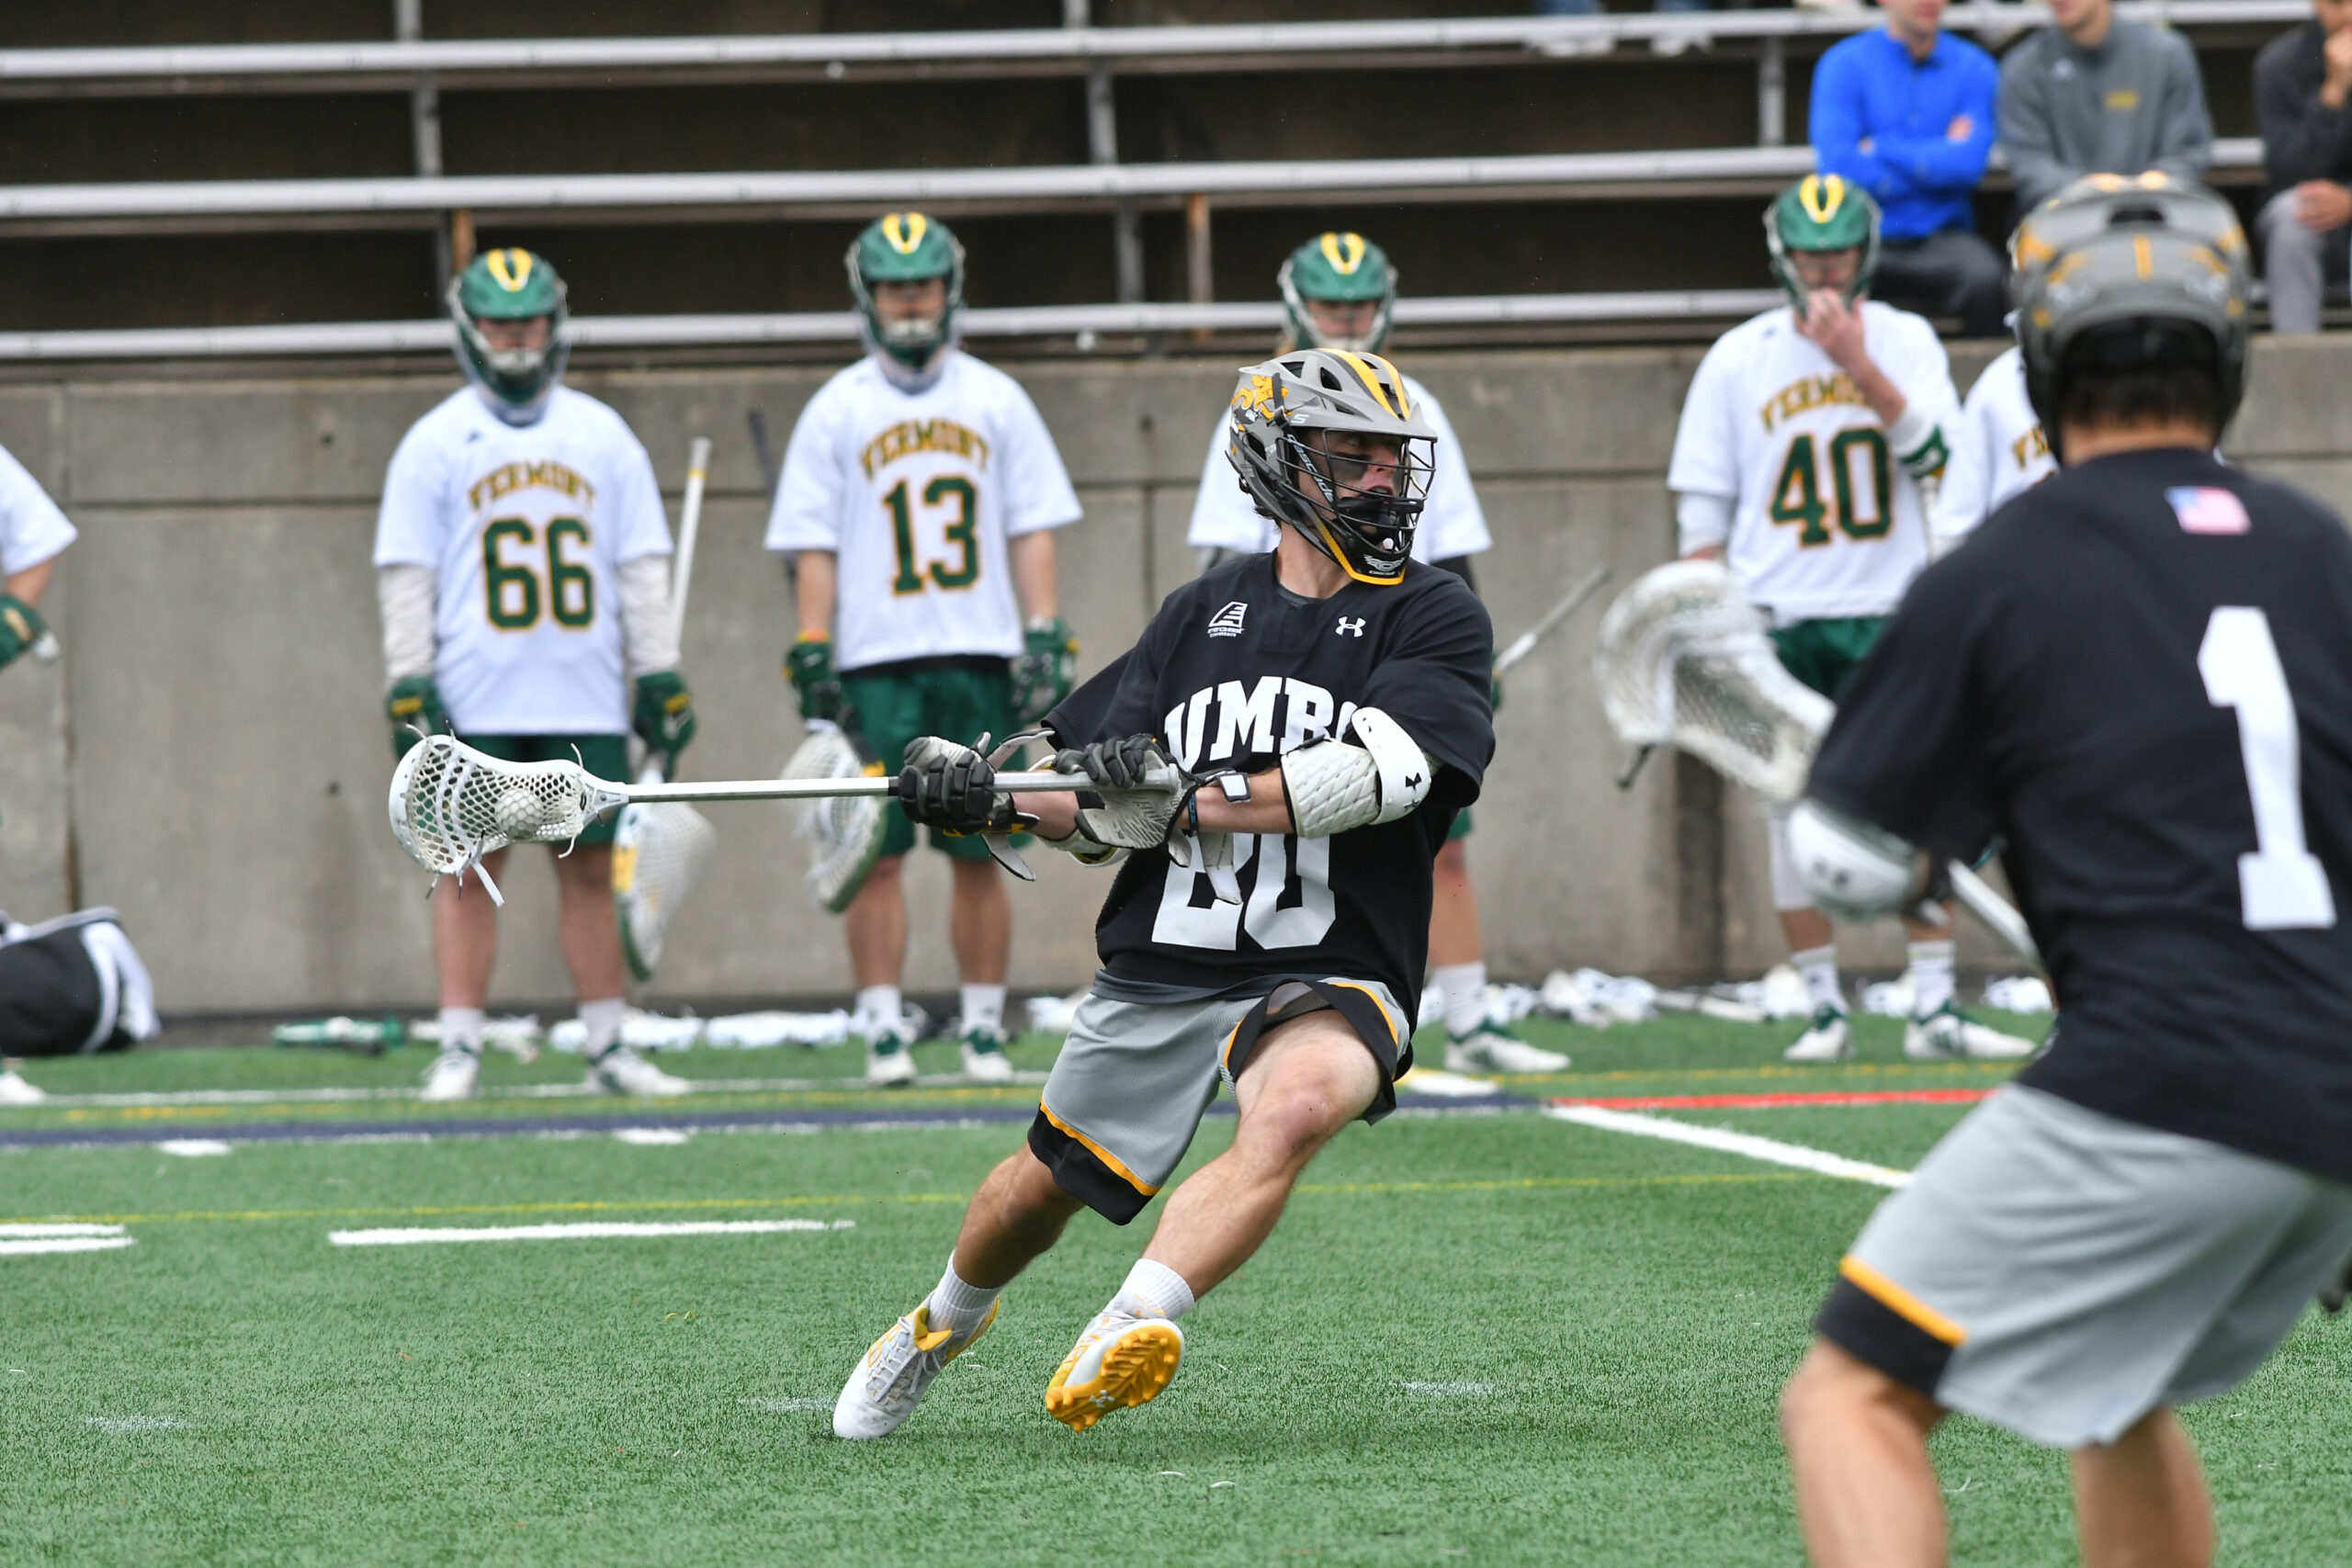 Men's lacrosse player in action on the field, as players from the opposing team stand in the background.